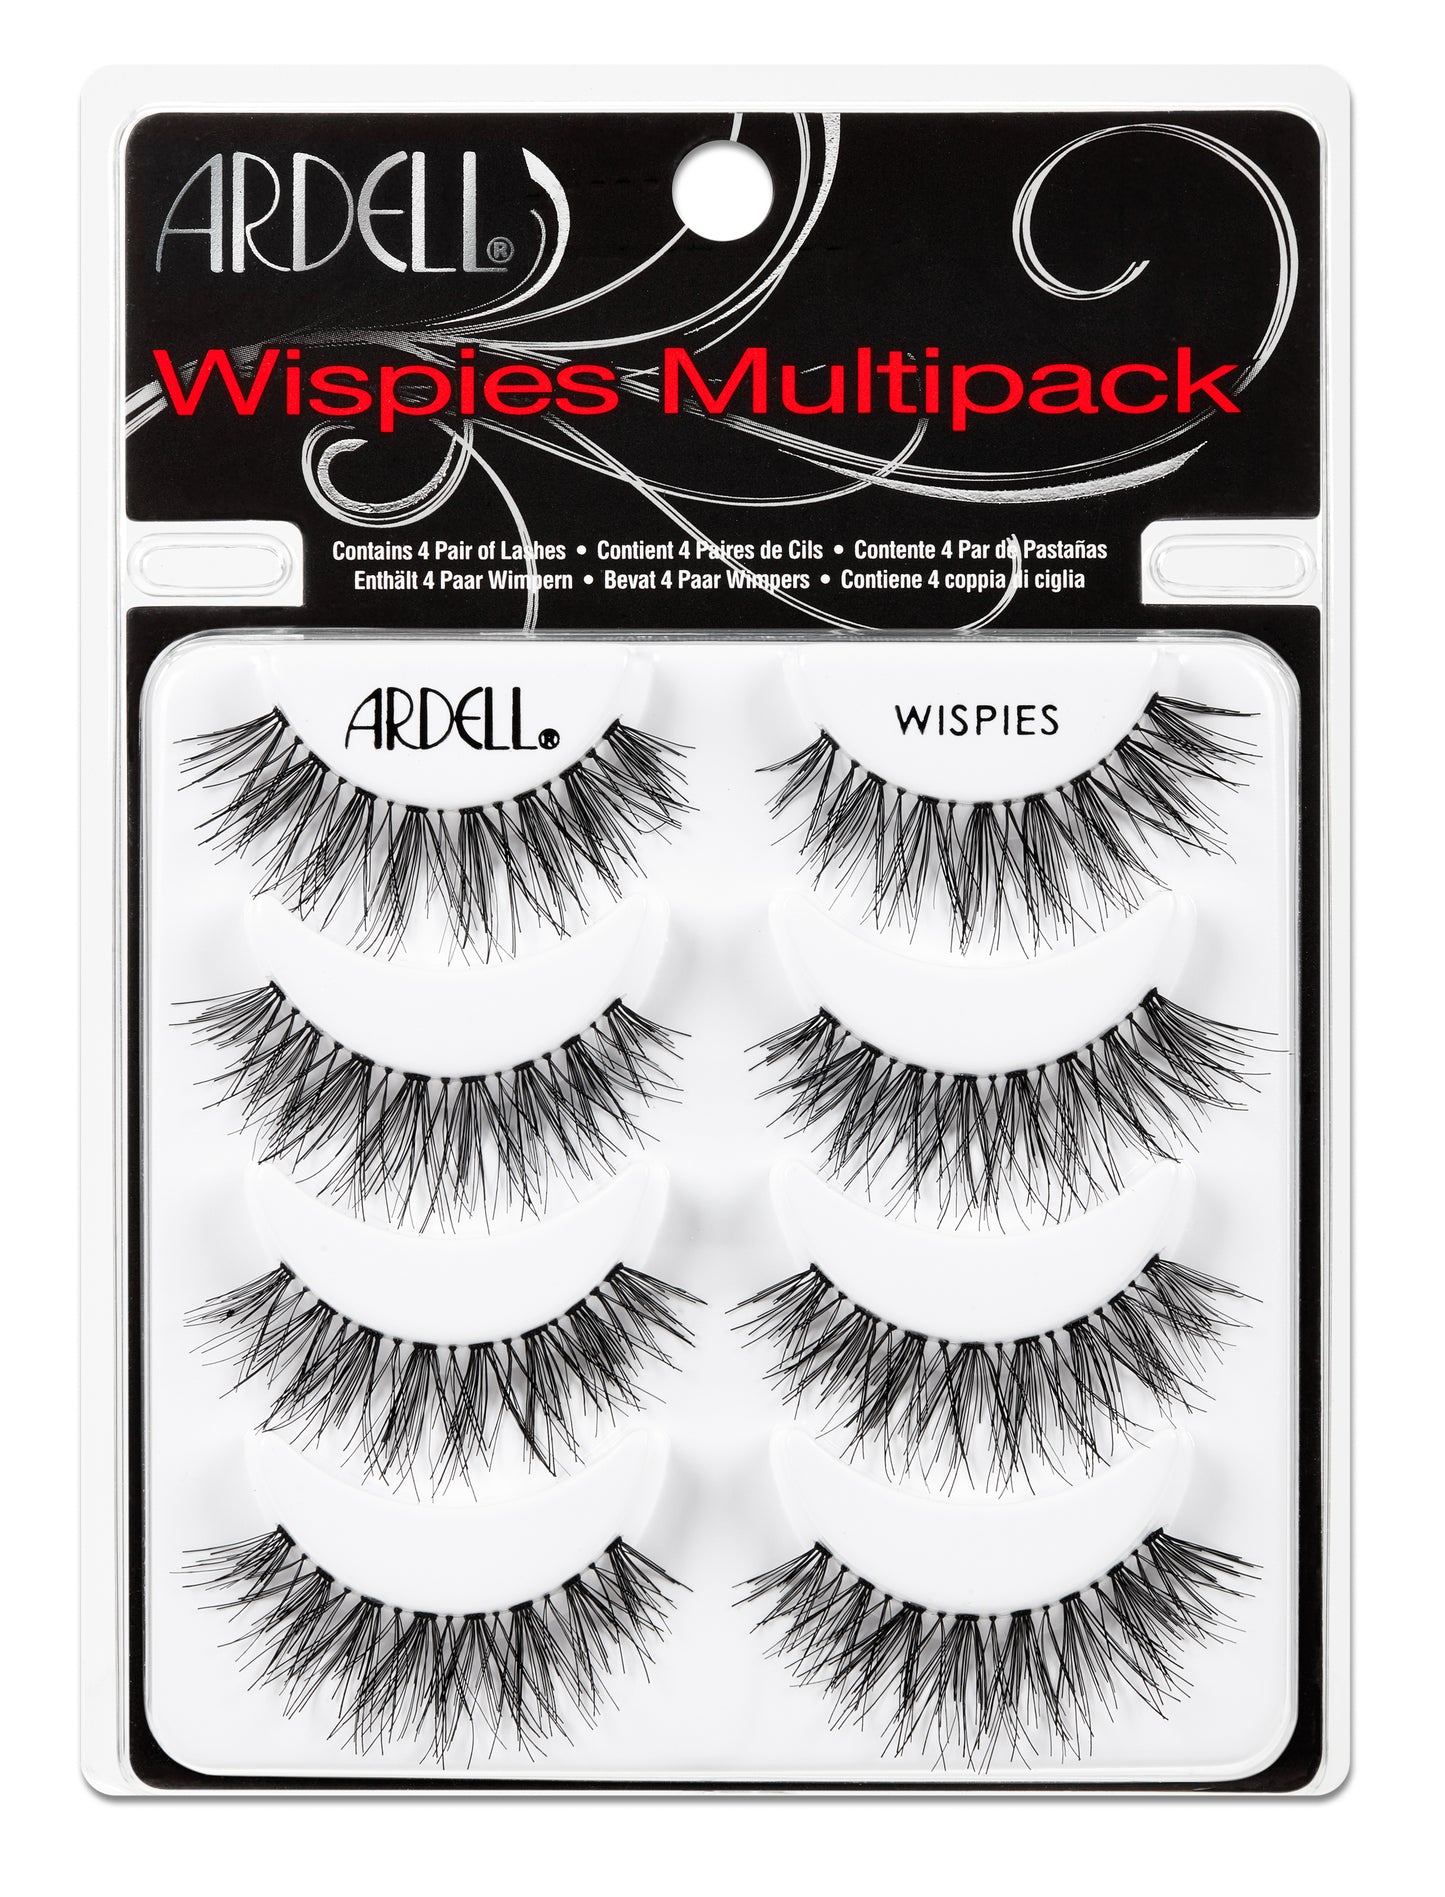 Ardell Wispies Multipack (contains 4 pairs)